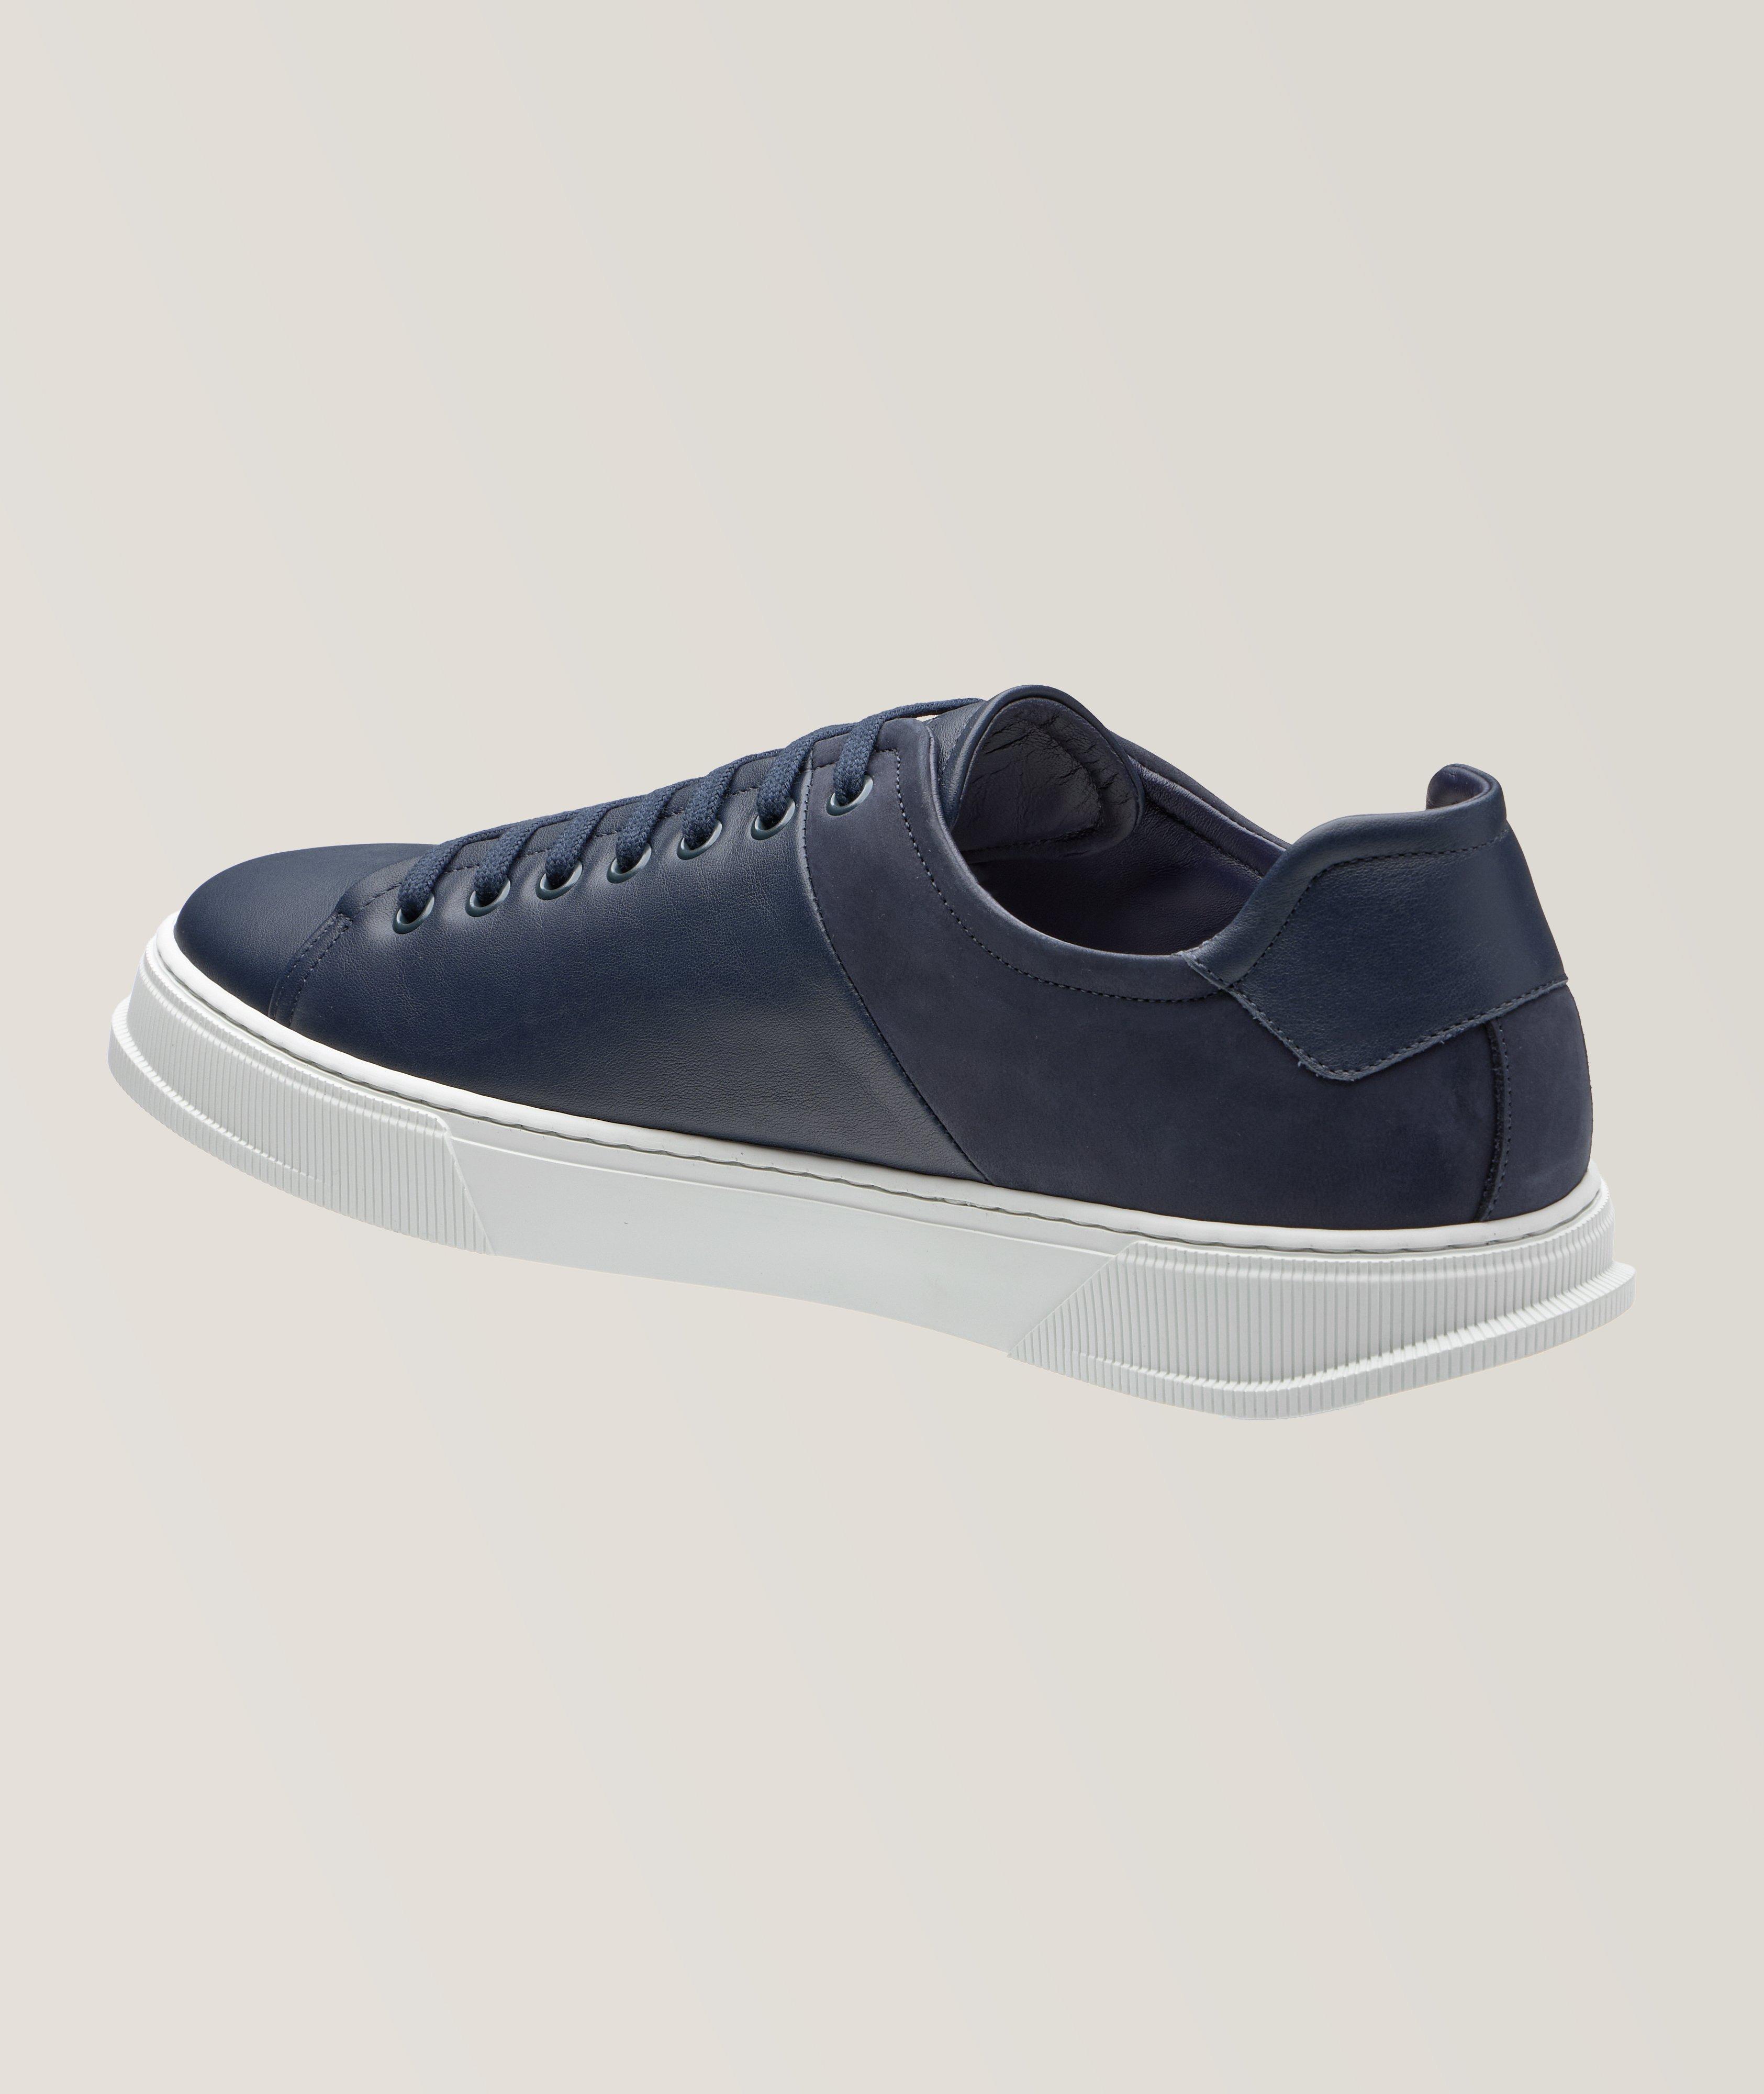 Clayton 1 Leather Sneakers